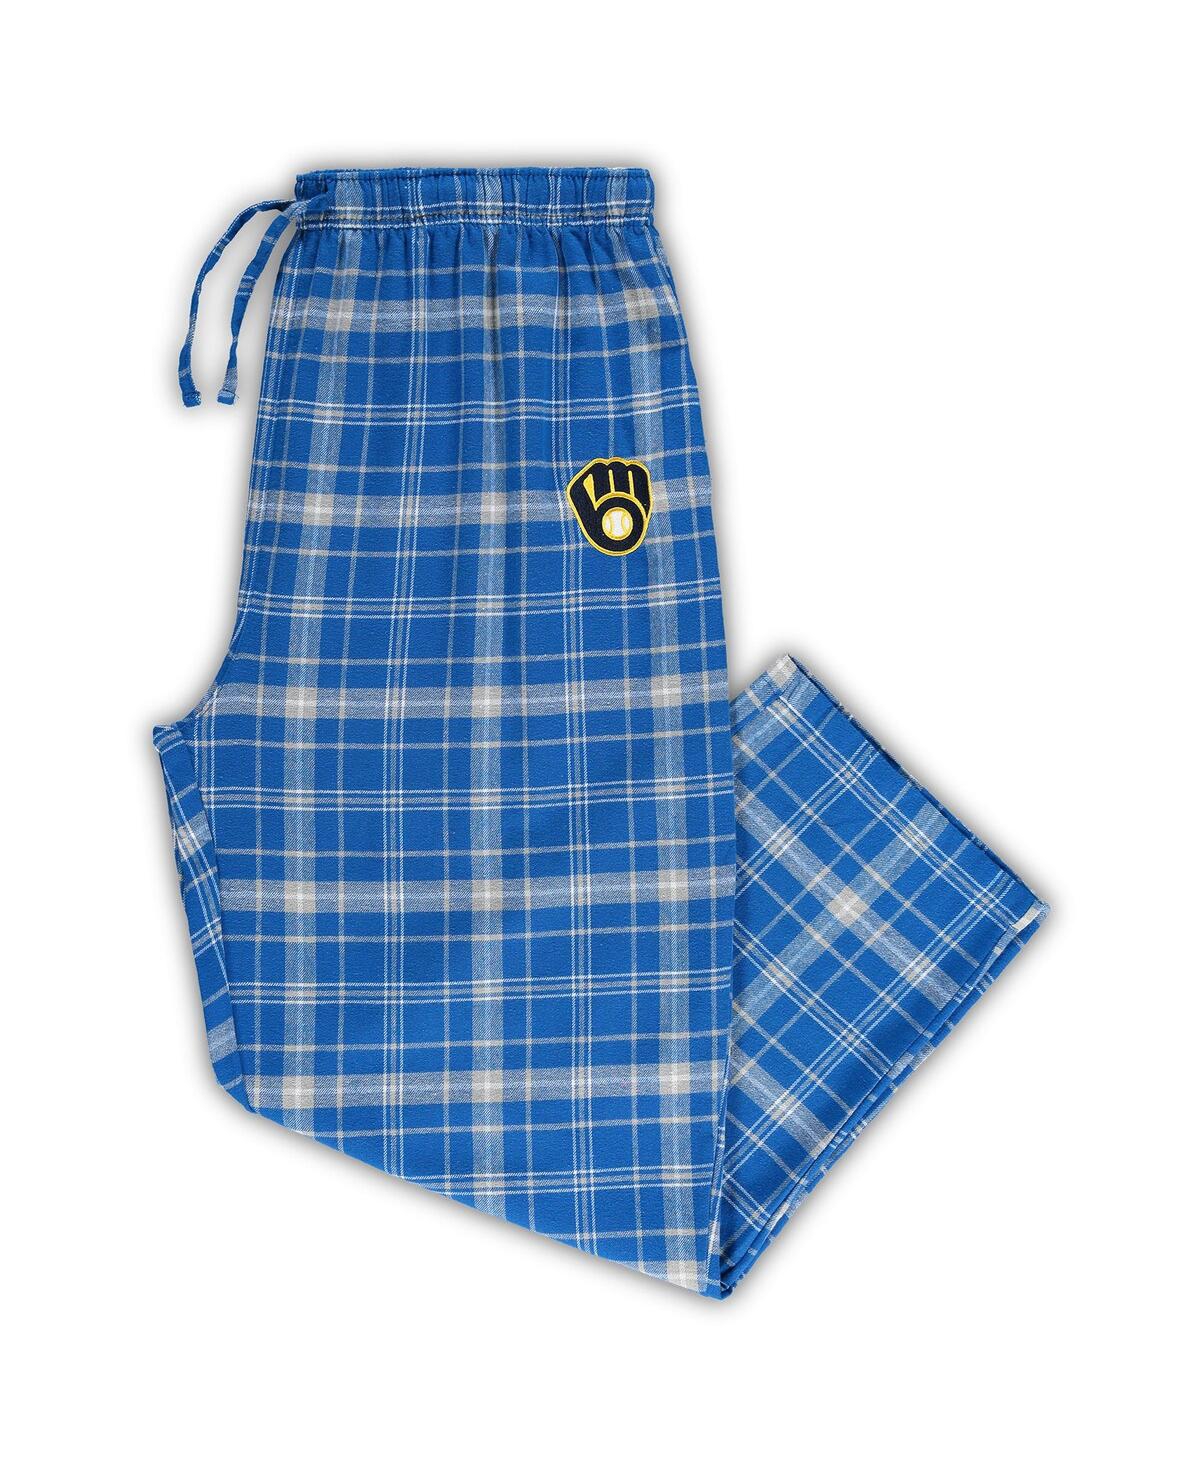 Men's Concepts Sport Royal, Gray Milwaukee Brewers Big and Tall Team Flannel Pants - Royal, Gray